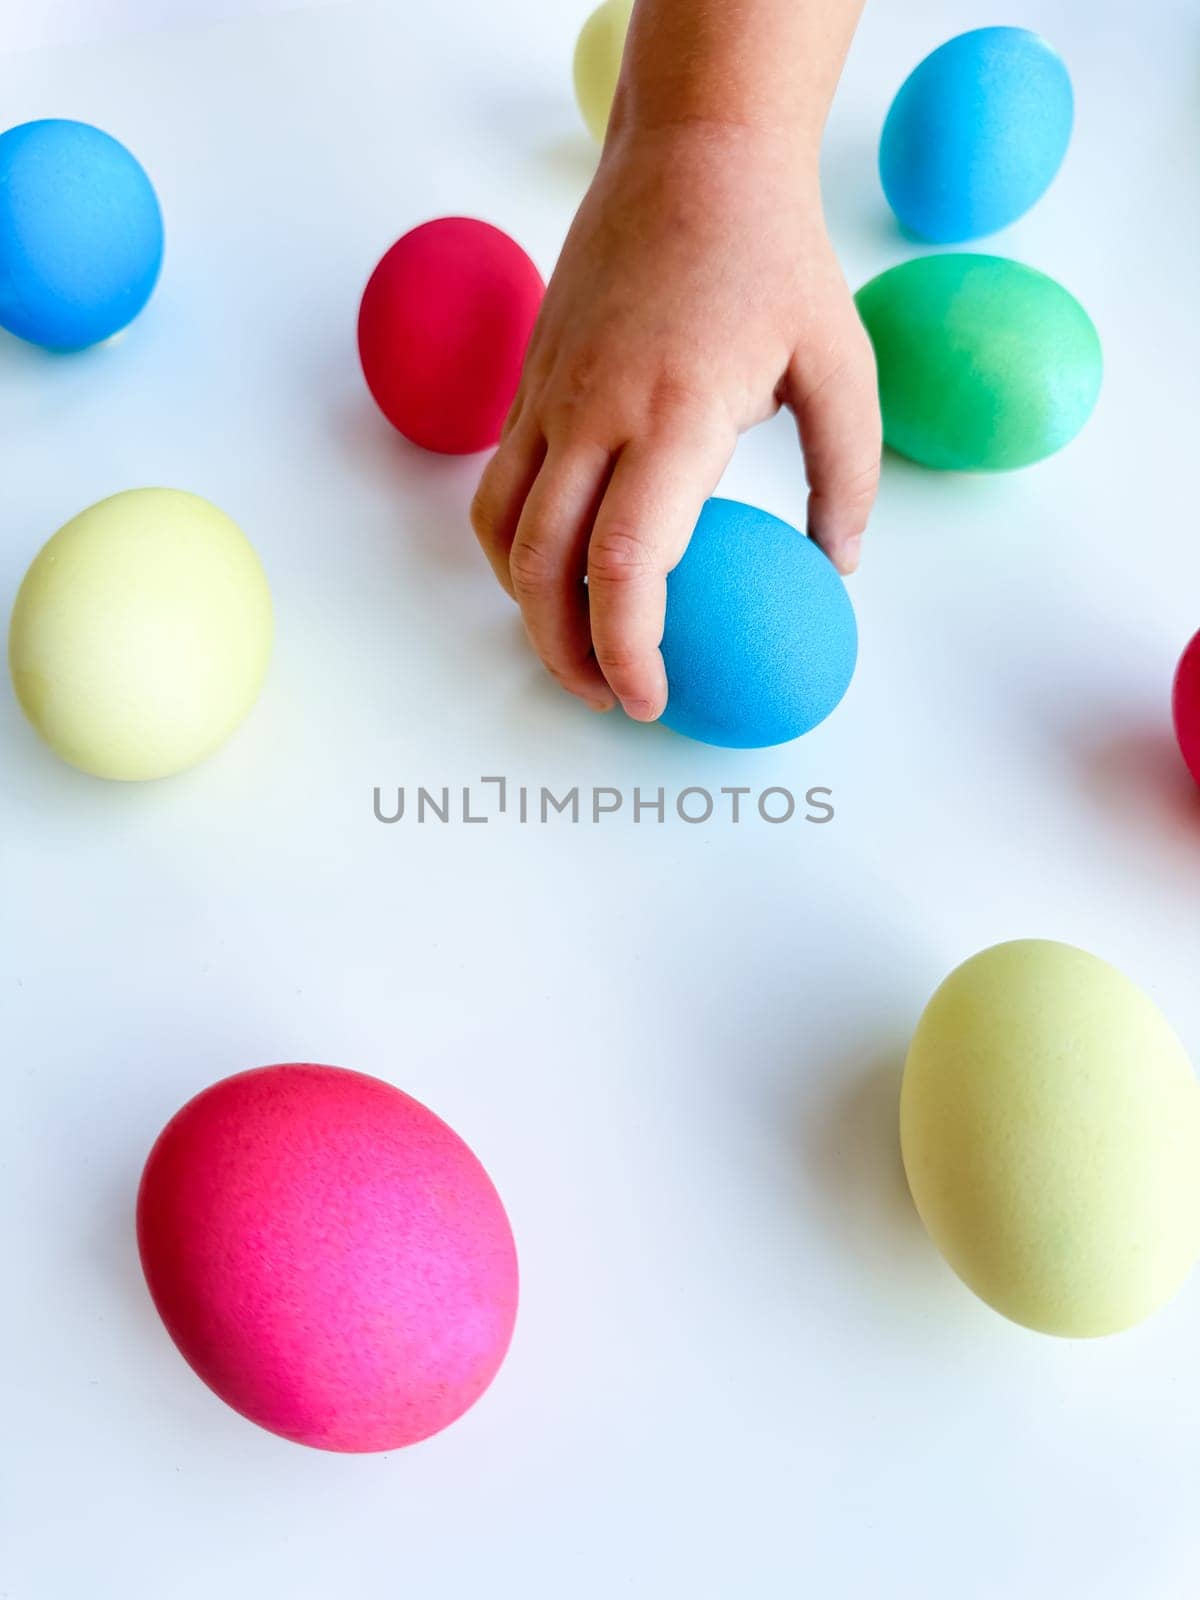 Child's hand picking up a blue Easter egg among colorful eggs on a white surface, interactive and engaging holiday activity concept. Can be used for educational content highlighting fine motor skills development in children, Easter egg hunt event promotions, family friendly activity ideas. . High quality photo